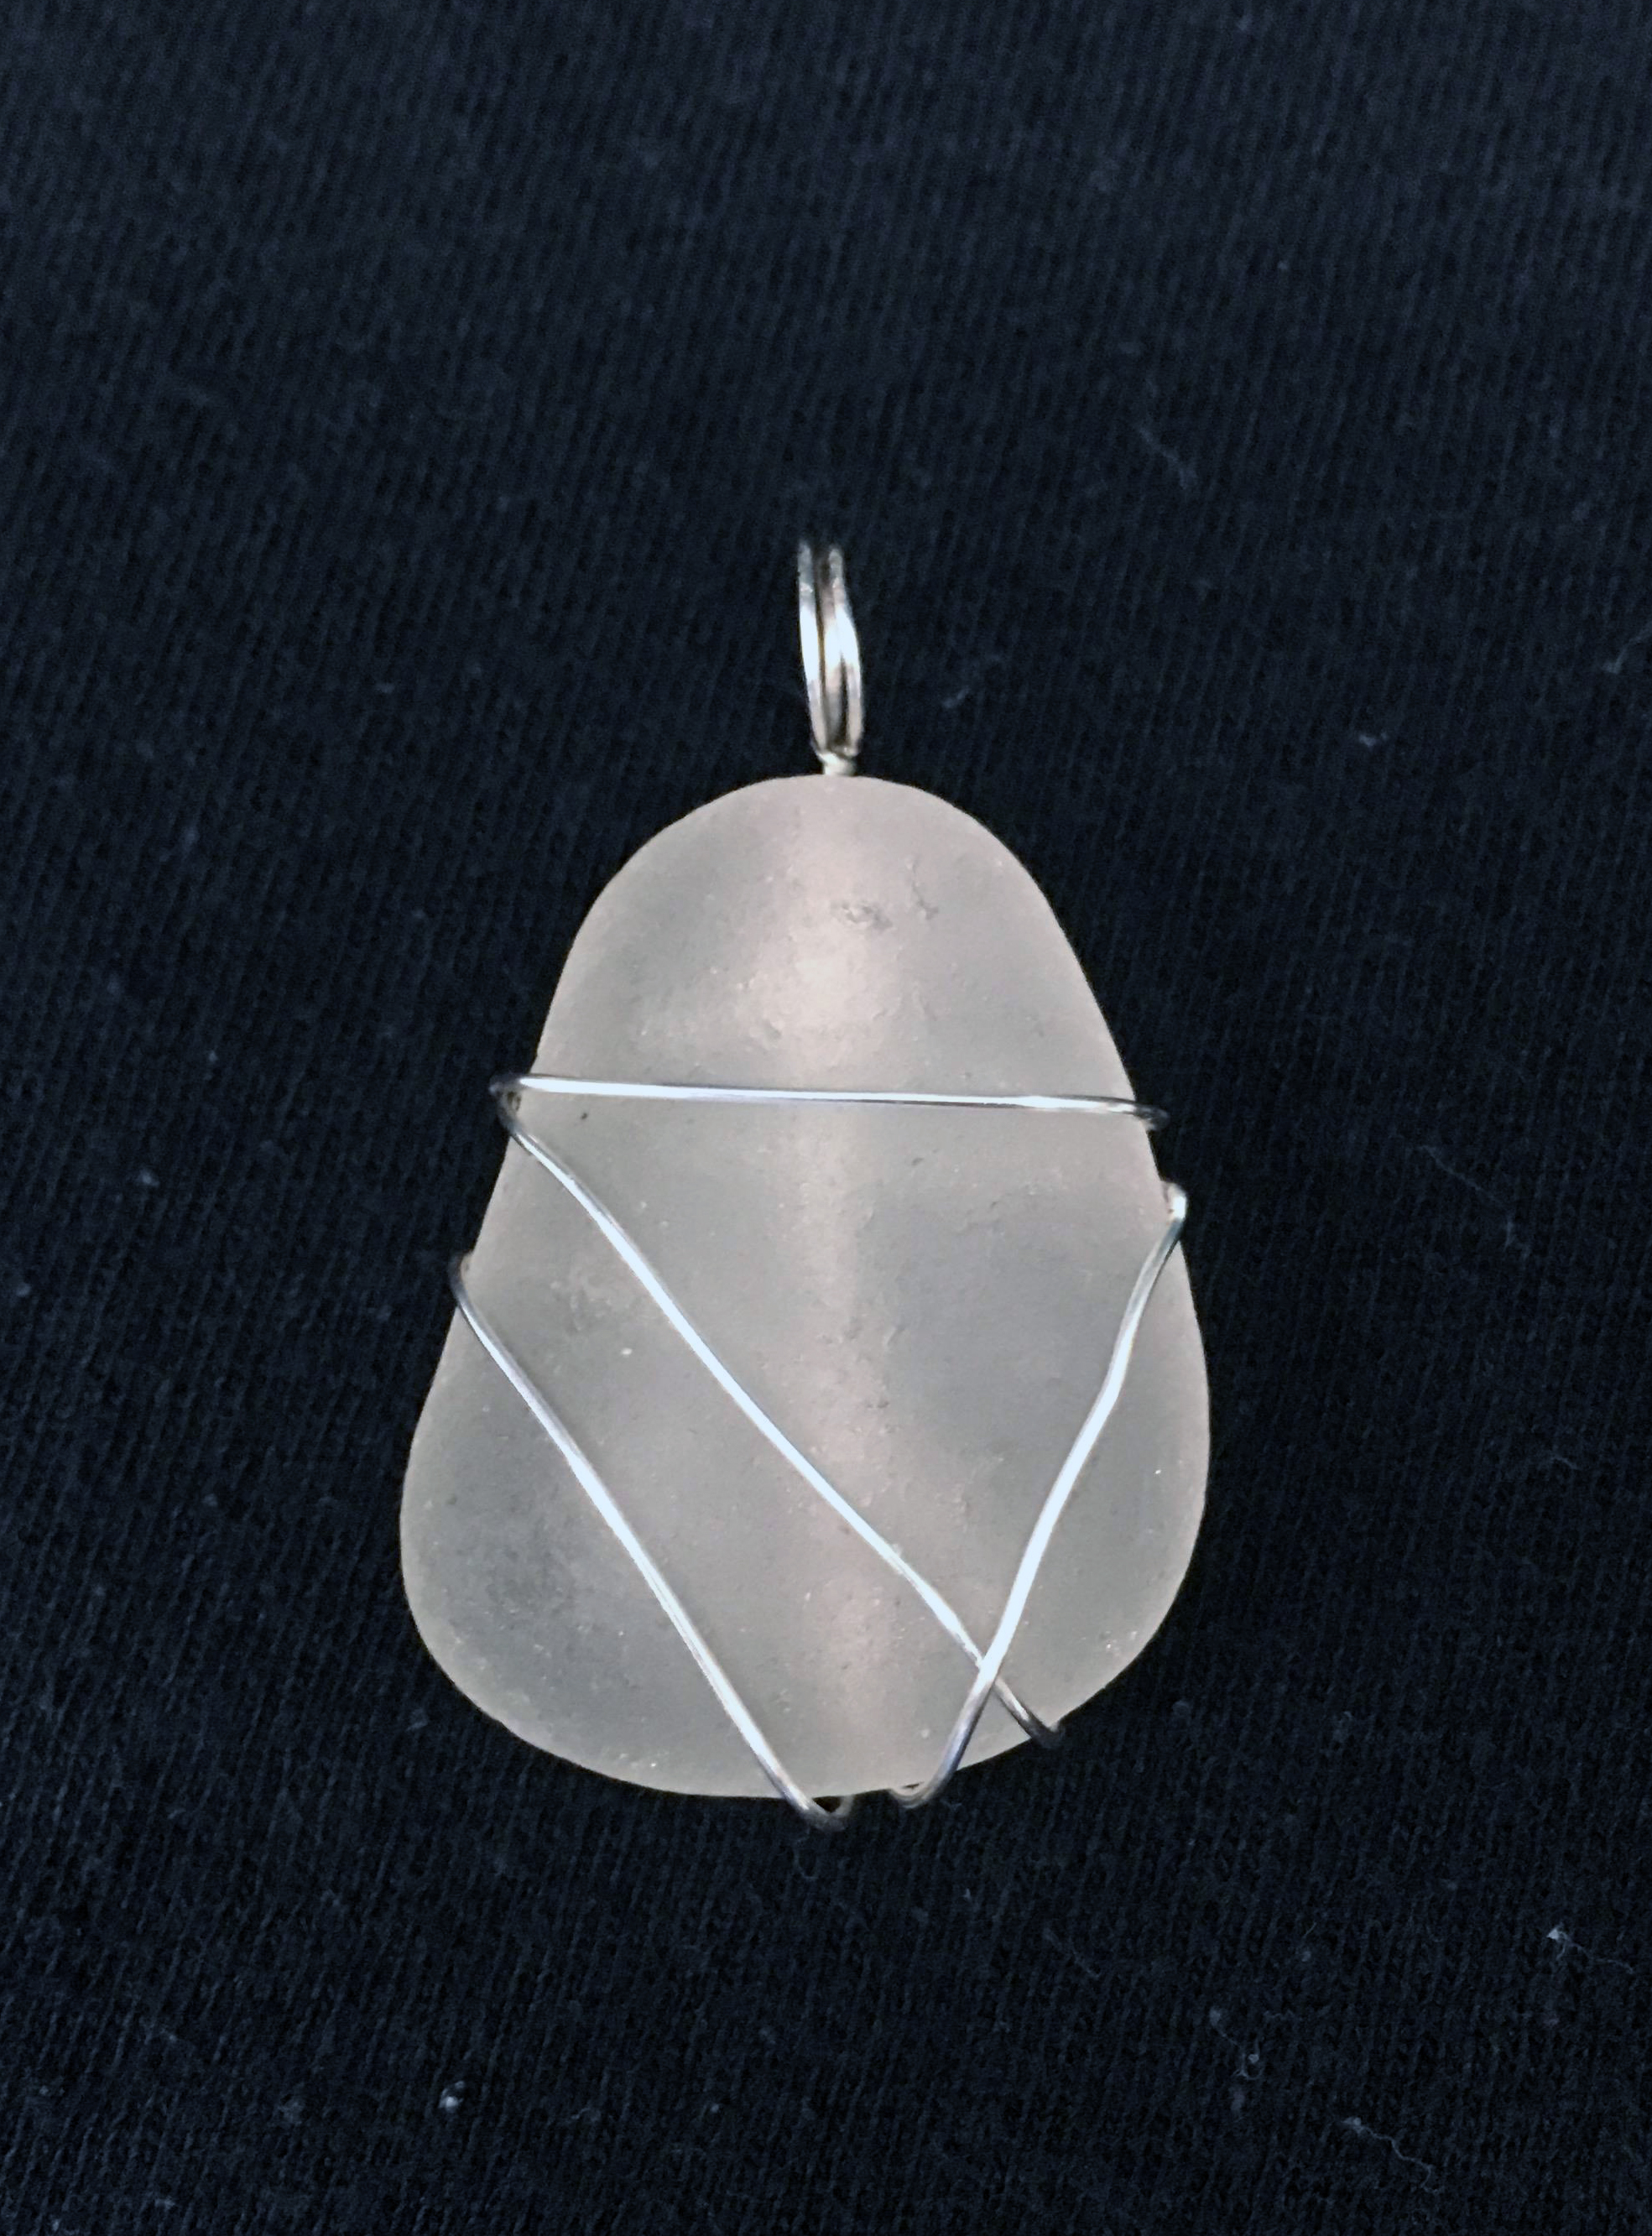 Pretty stone wrapped in wire and made into a pendant.